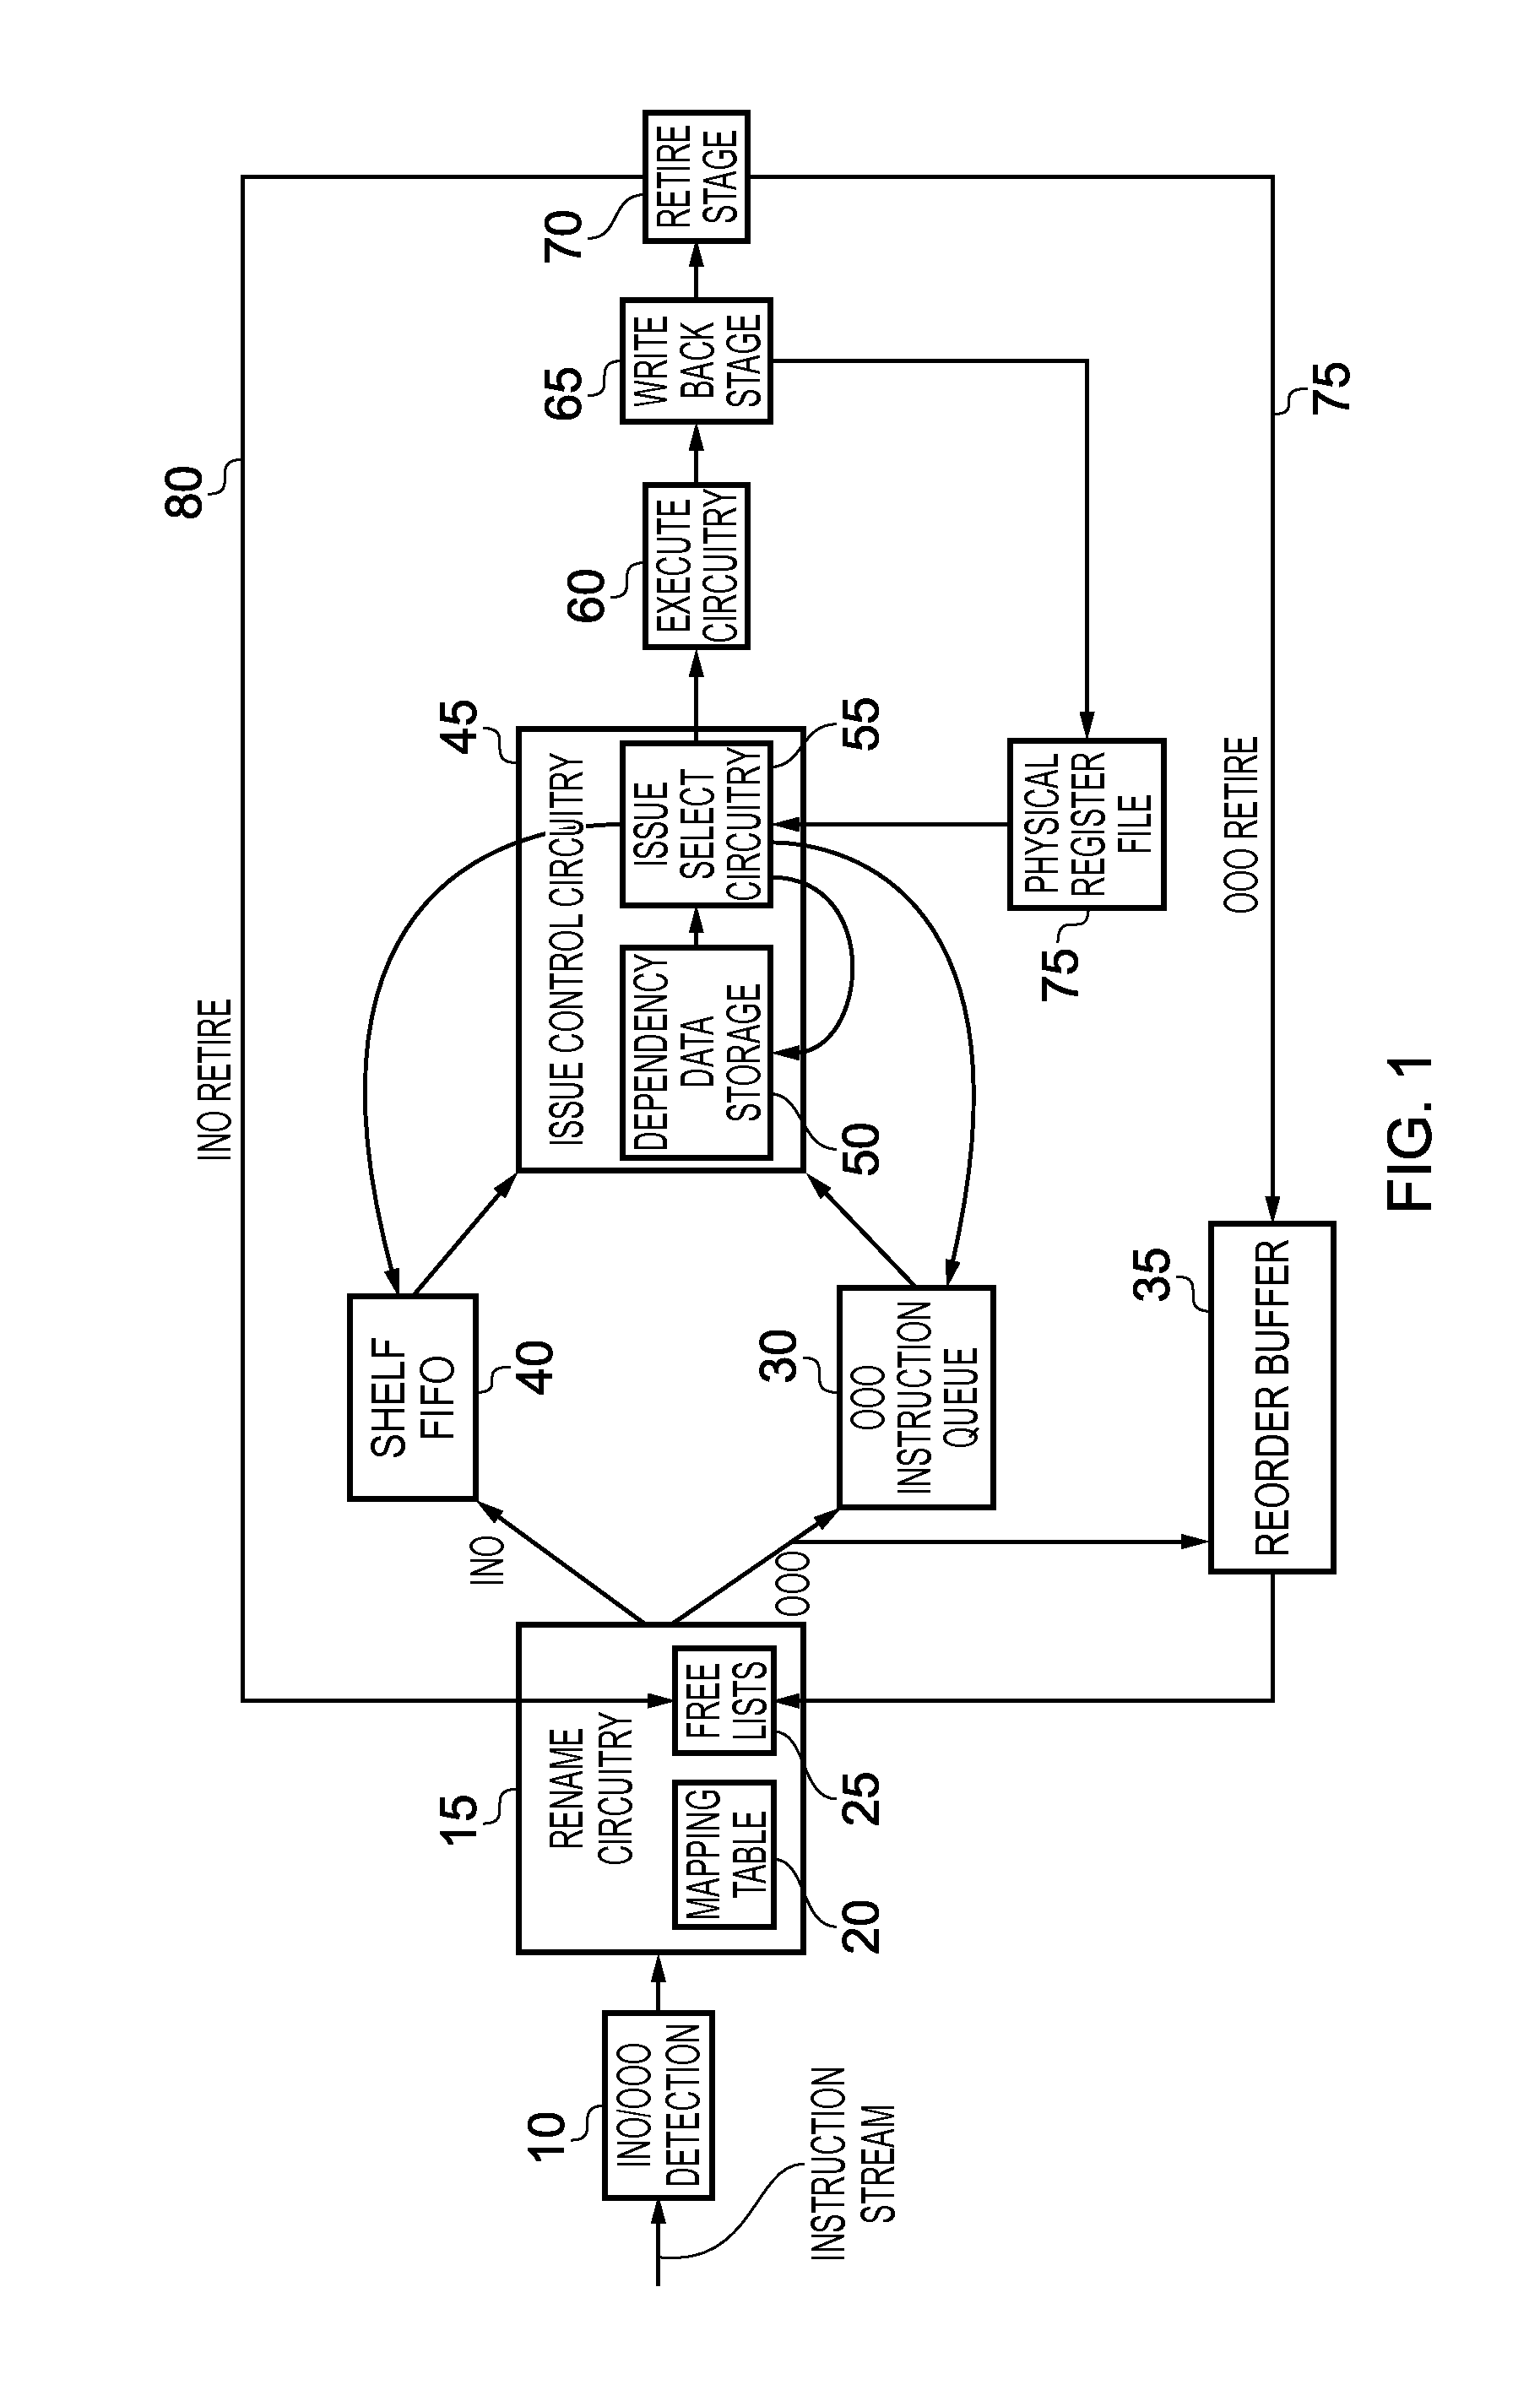 Data processing apparatus and method for executing a stream of instructions out of order with respect to original program order